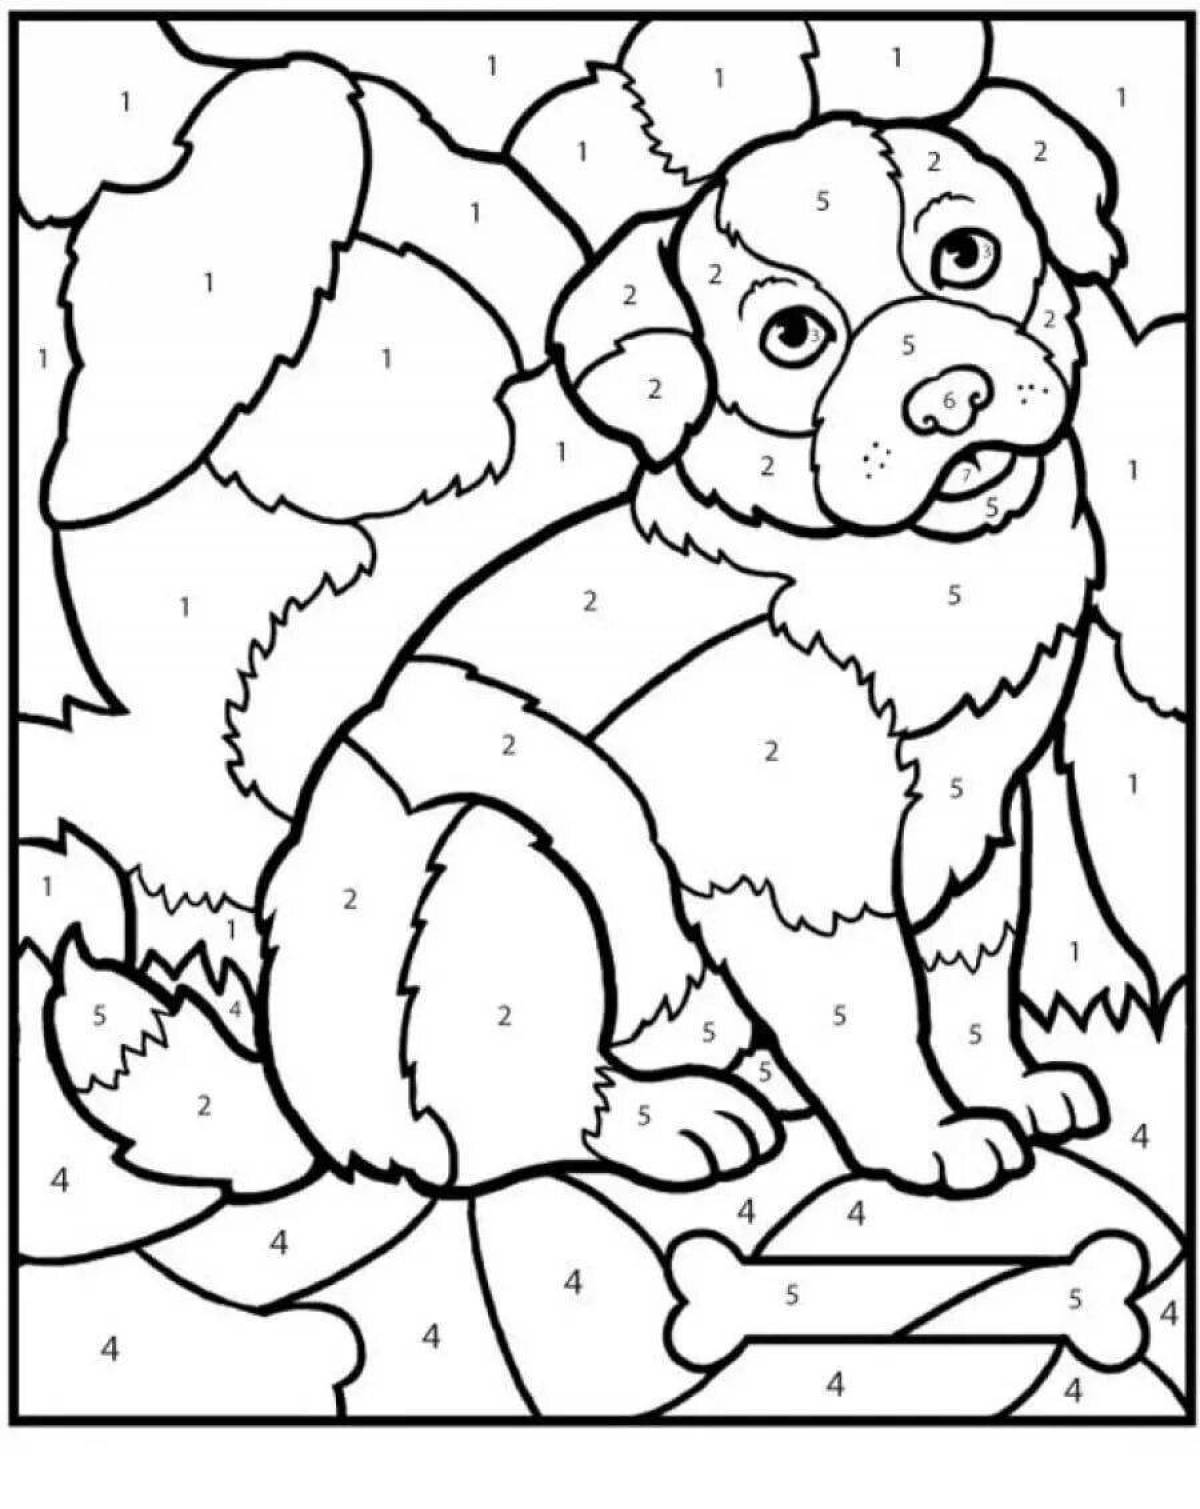 Interesting coloring book with small numbers